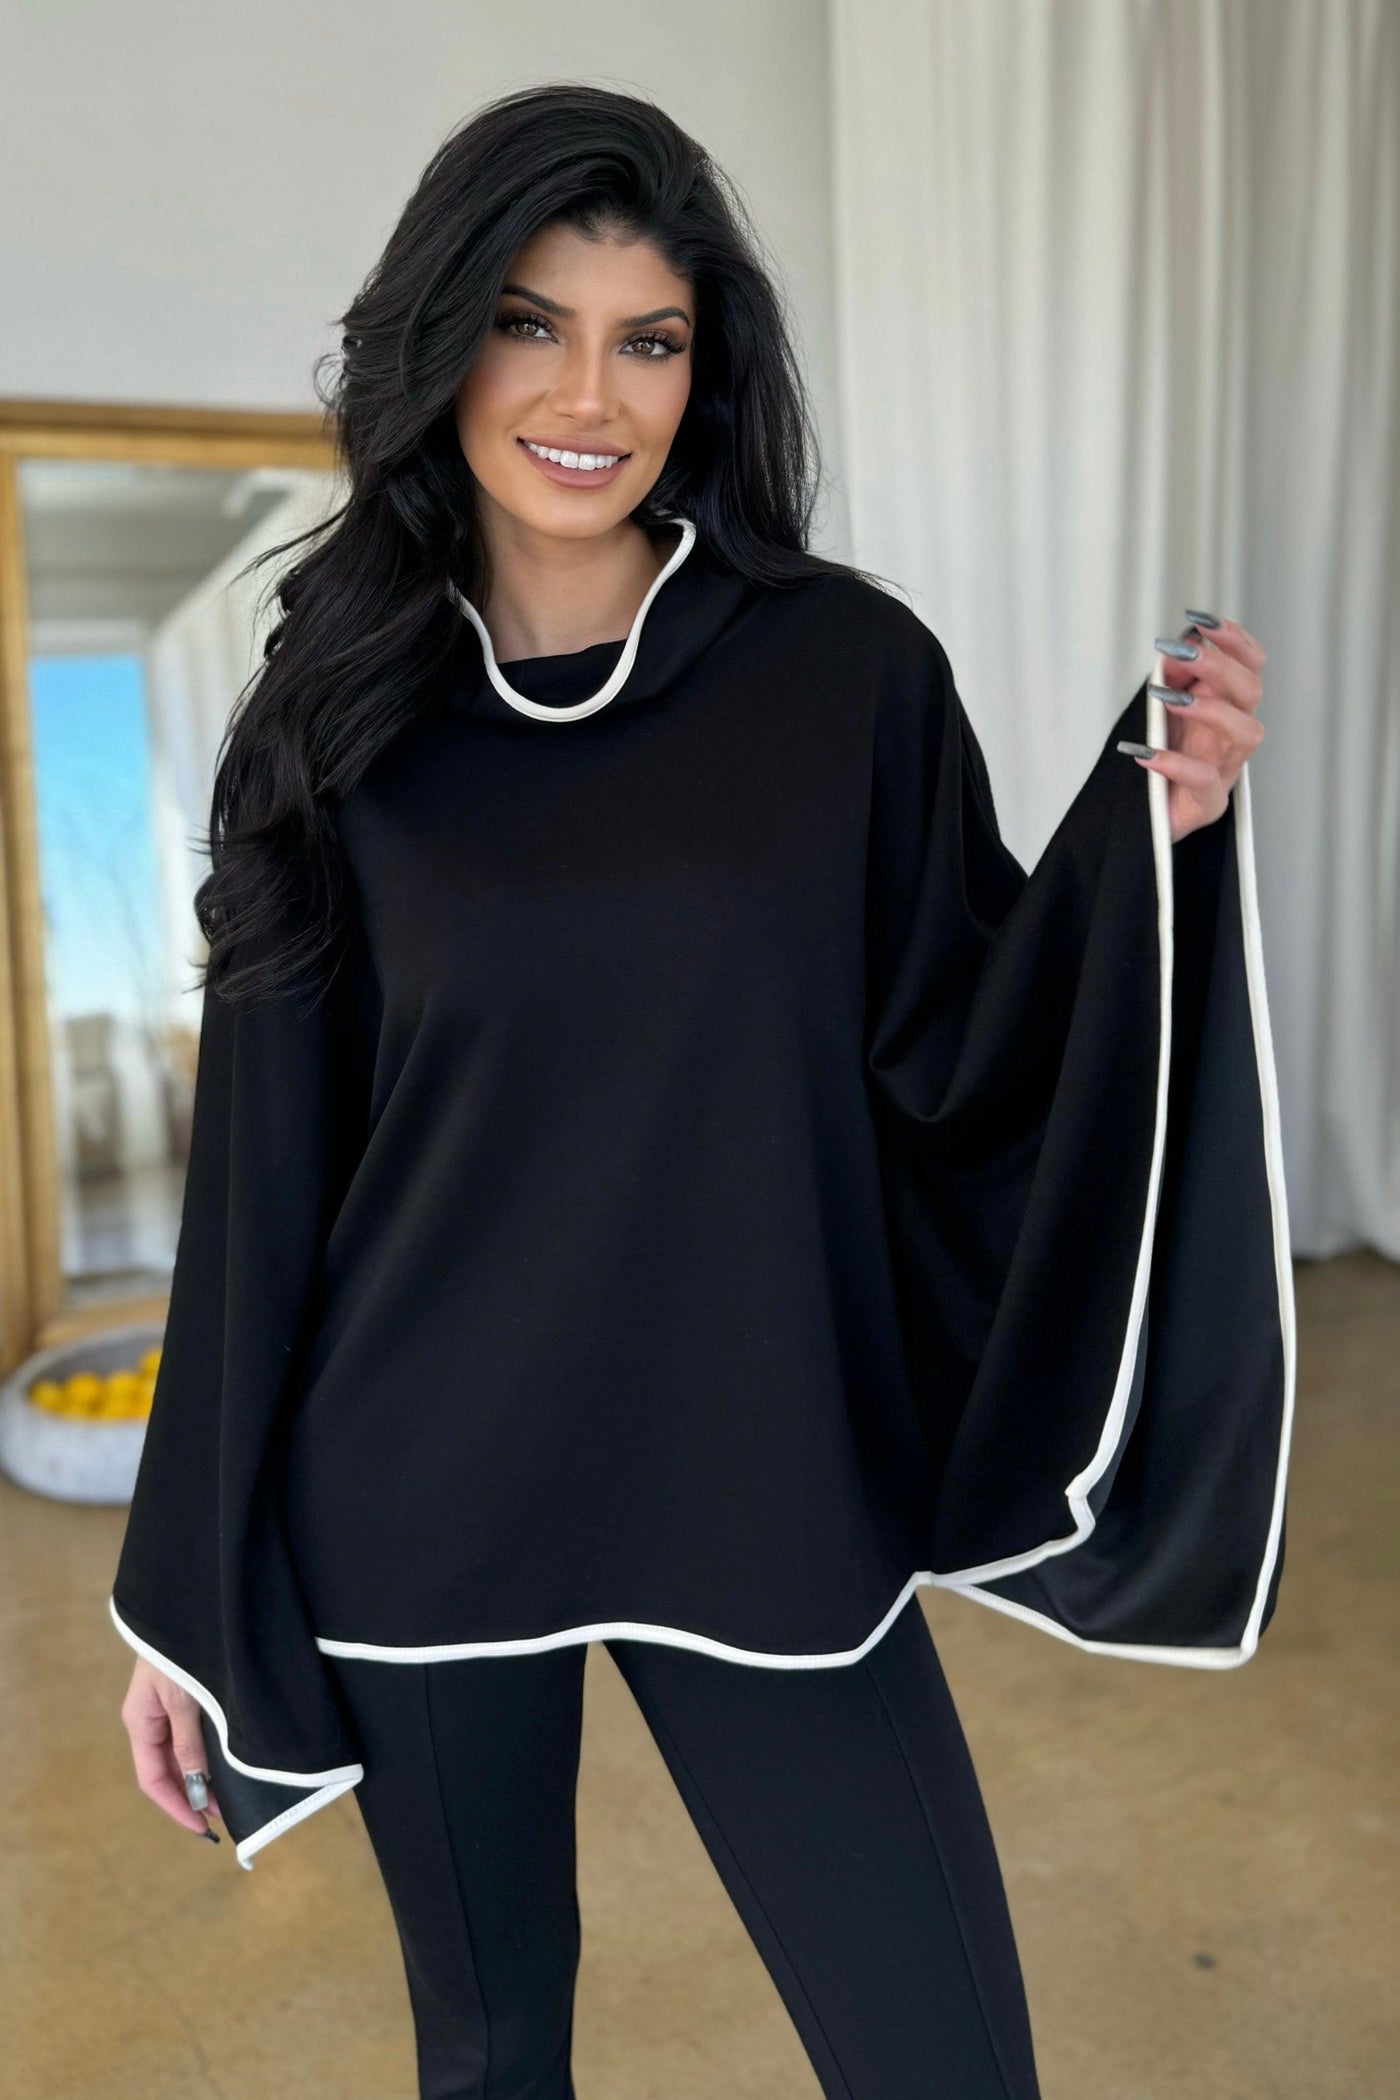 FLORENCE PONCHO SWEATER , poncho , It's NOMB , BLACK PONCHO, BLACK SCUBA FABRIC PONCHO, DRESSY BLACK PONCHO WITH WHITE PIPING, poncho sweater, TURTLENECK PONCHO , It's NOMB , itsnomb.com